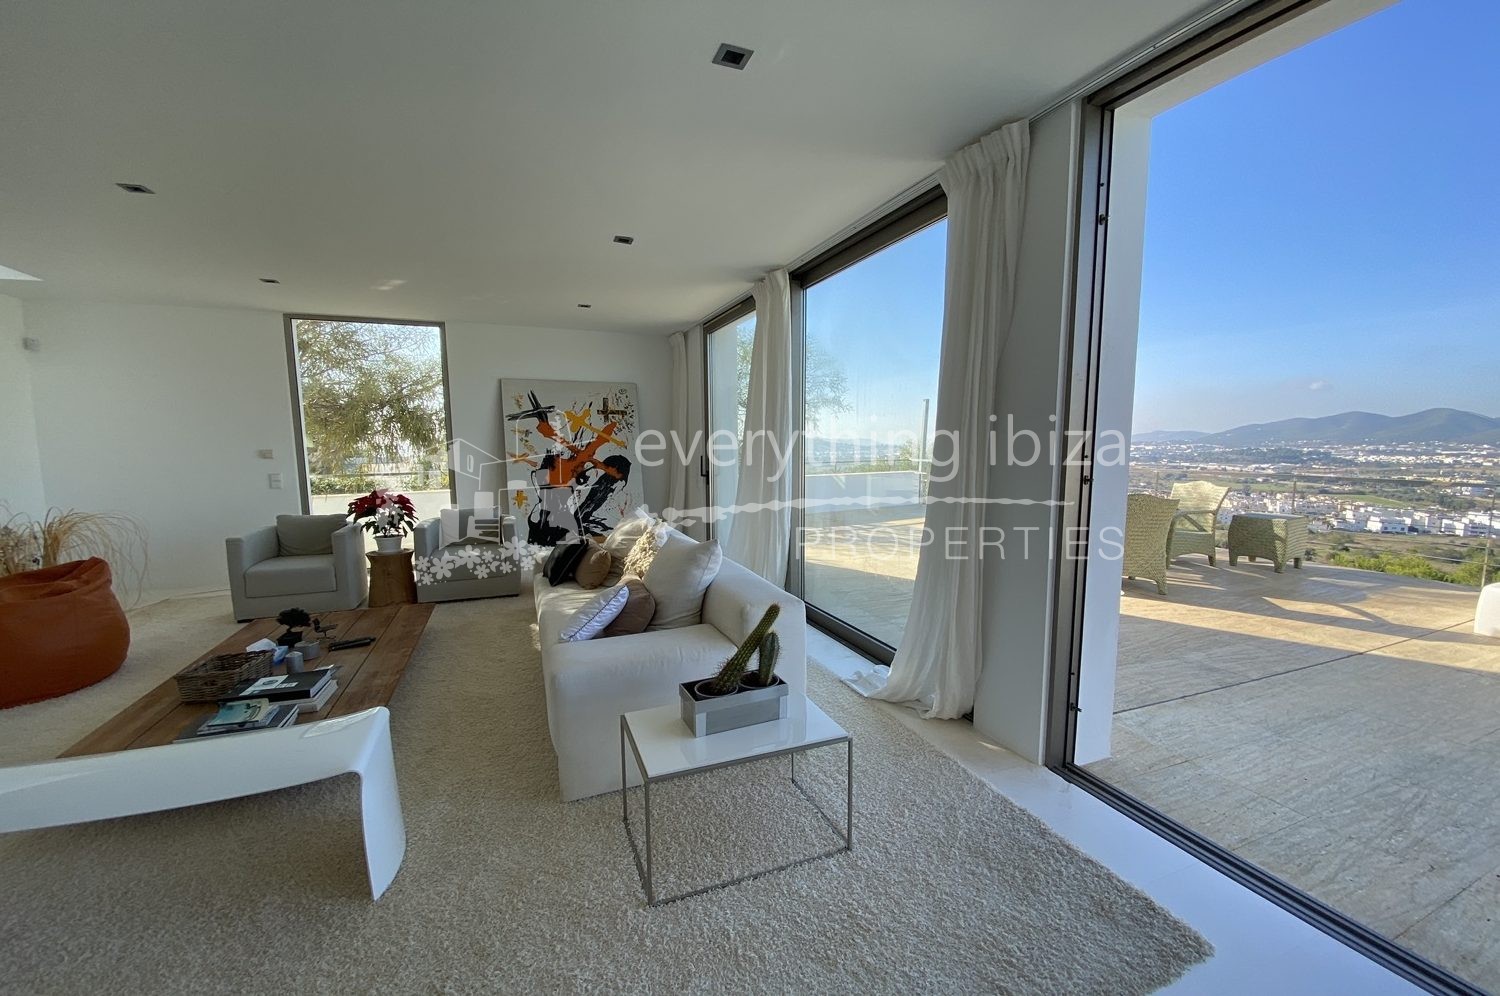 Magnificent villa with views, ref. 1291, for sale in Ibiza with everything ibiza Properties